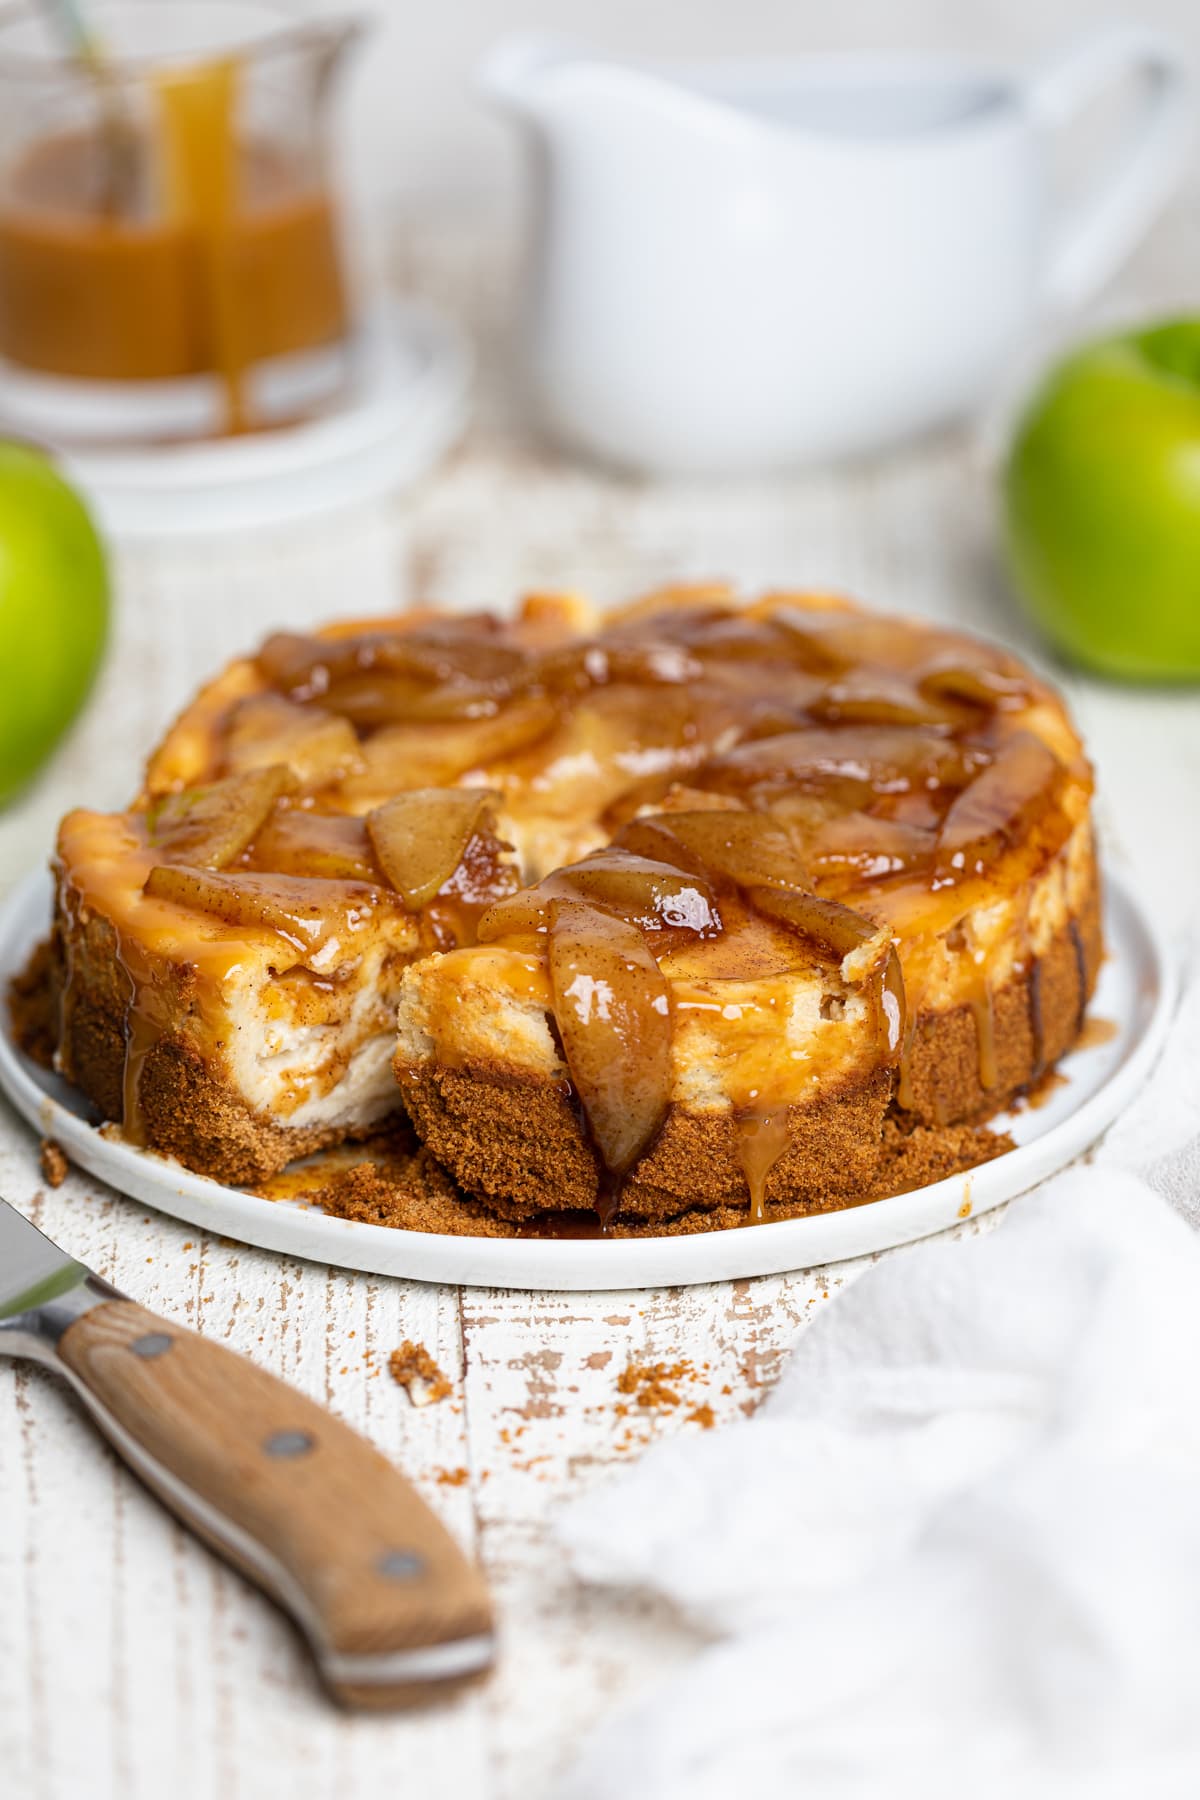 Sliced Caramel Apple Spice Cheesecake on a white plate